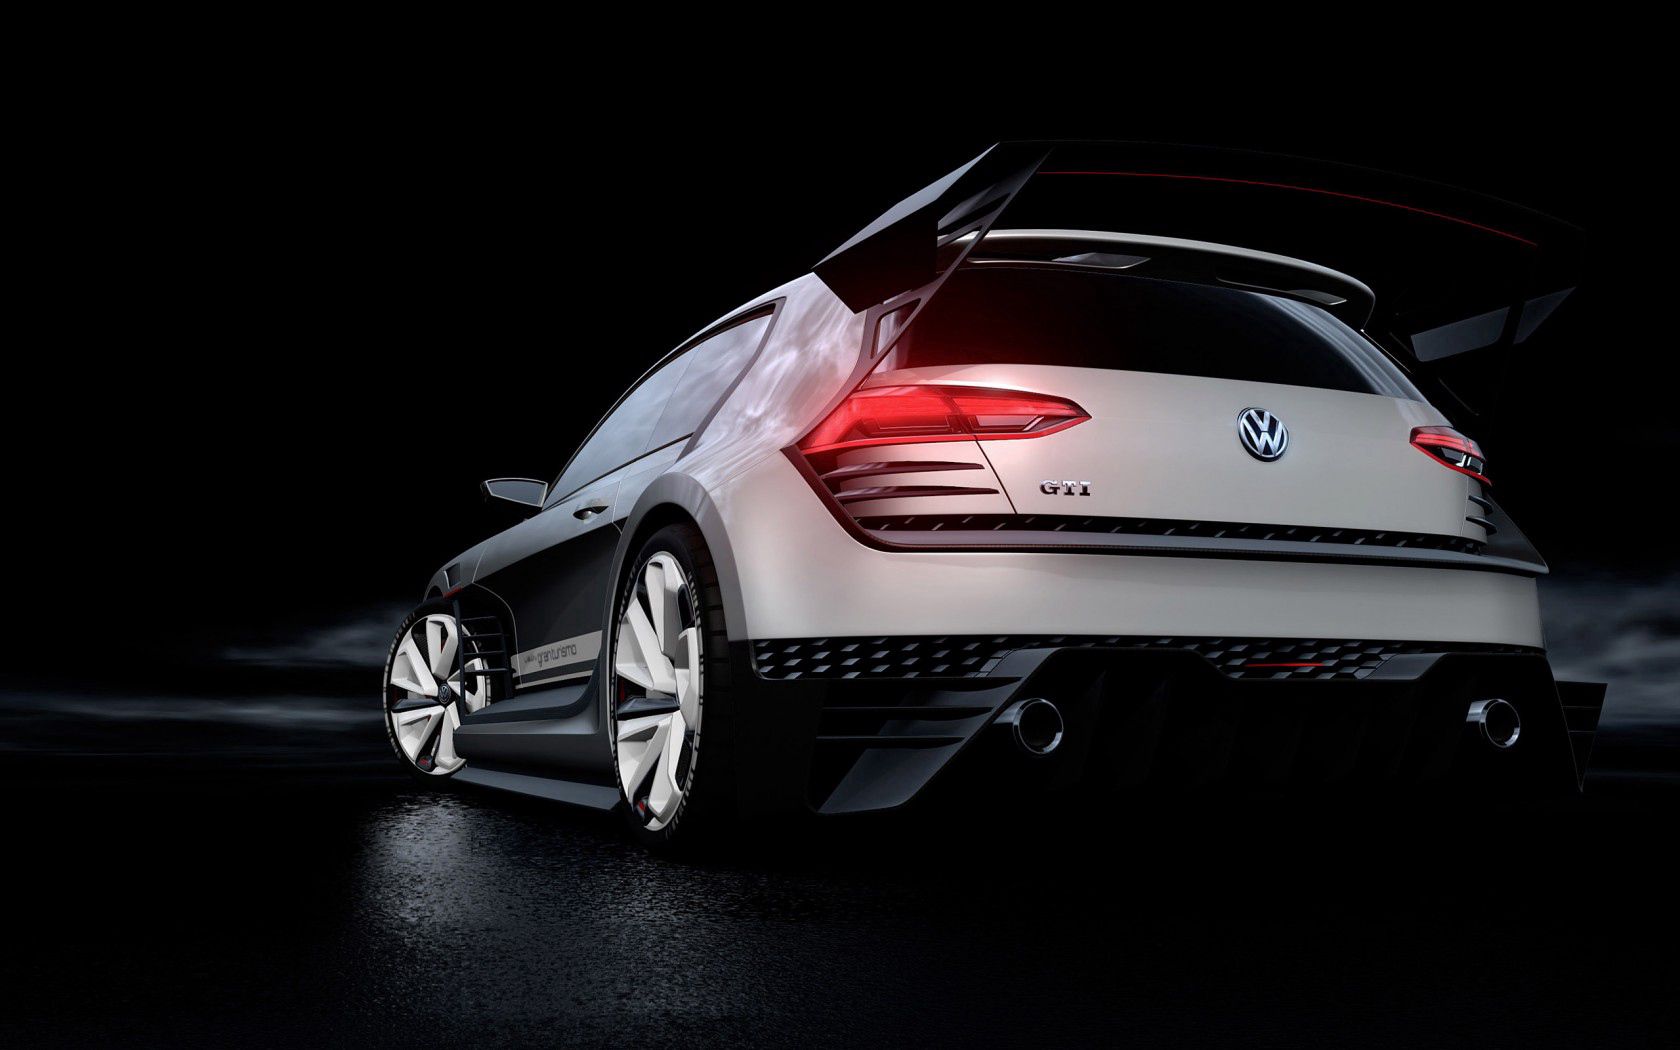 back view, gti, volkswagen, cars, concept, rear view, style